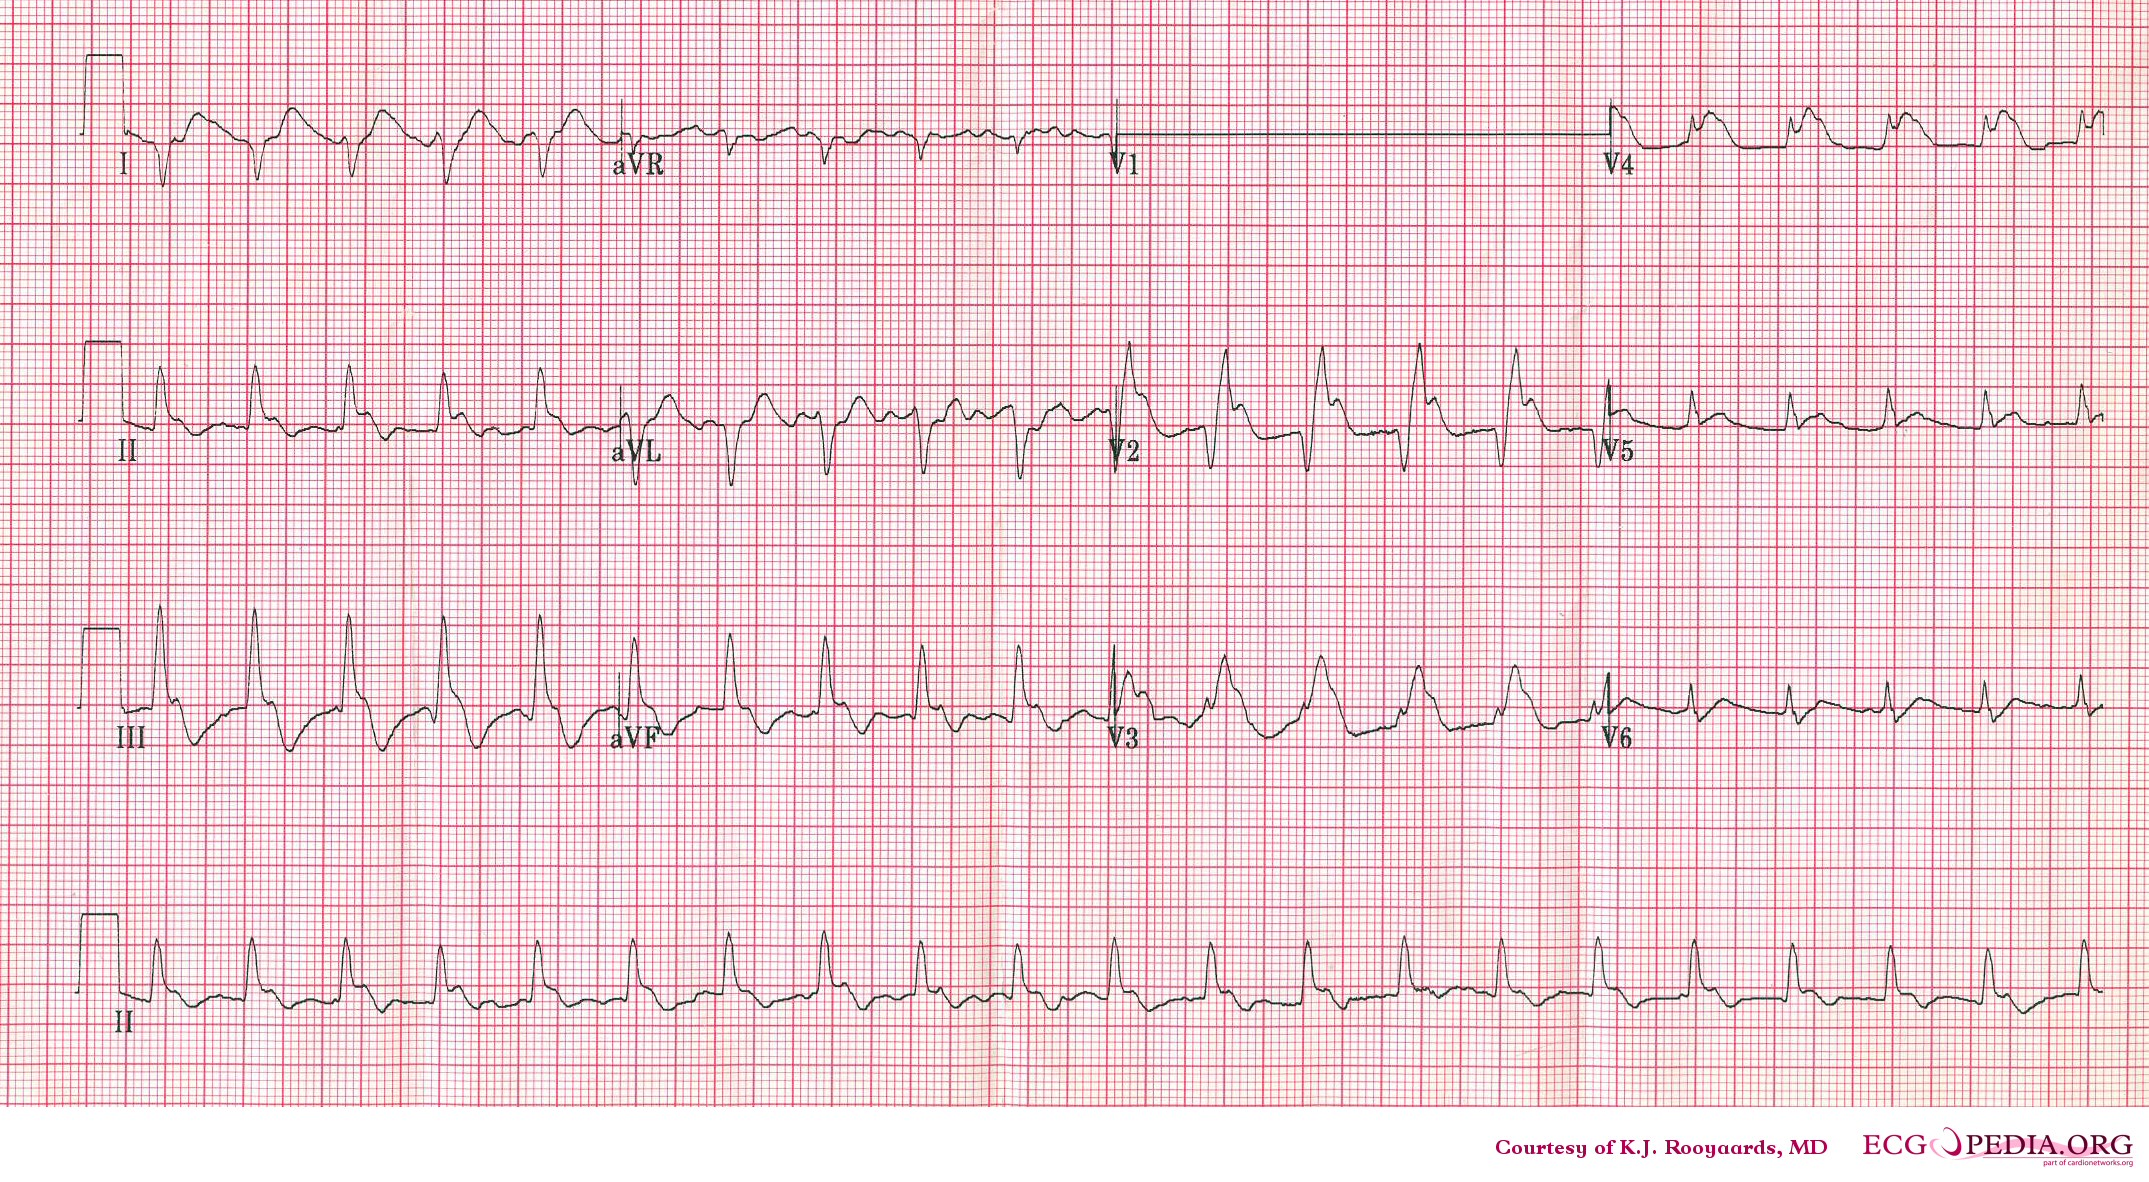 ECG of a patient with pulmonary embolism showing sinus tachycardia and right axis deviation.